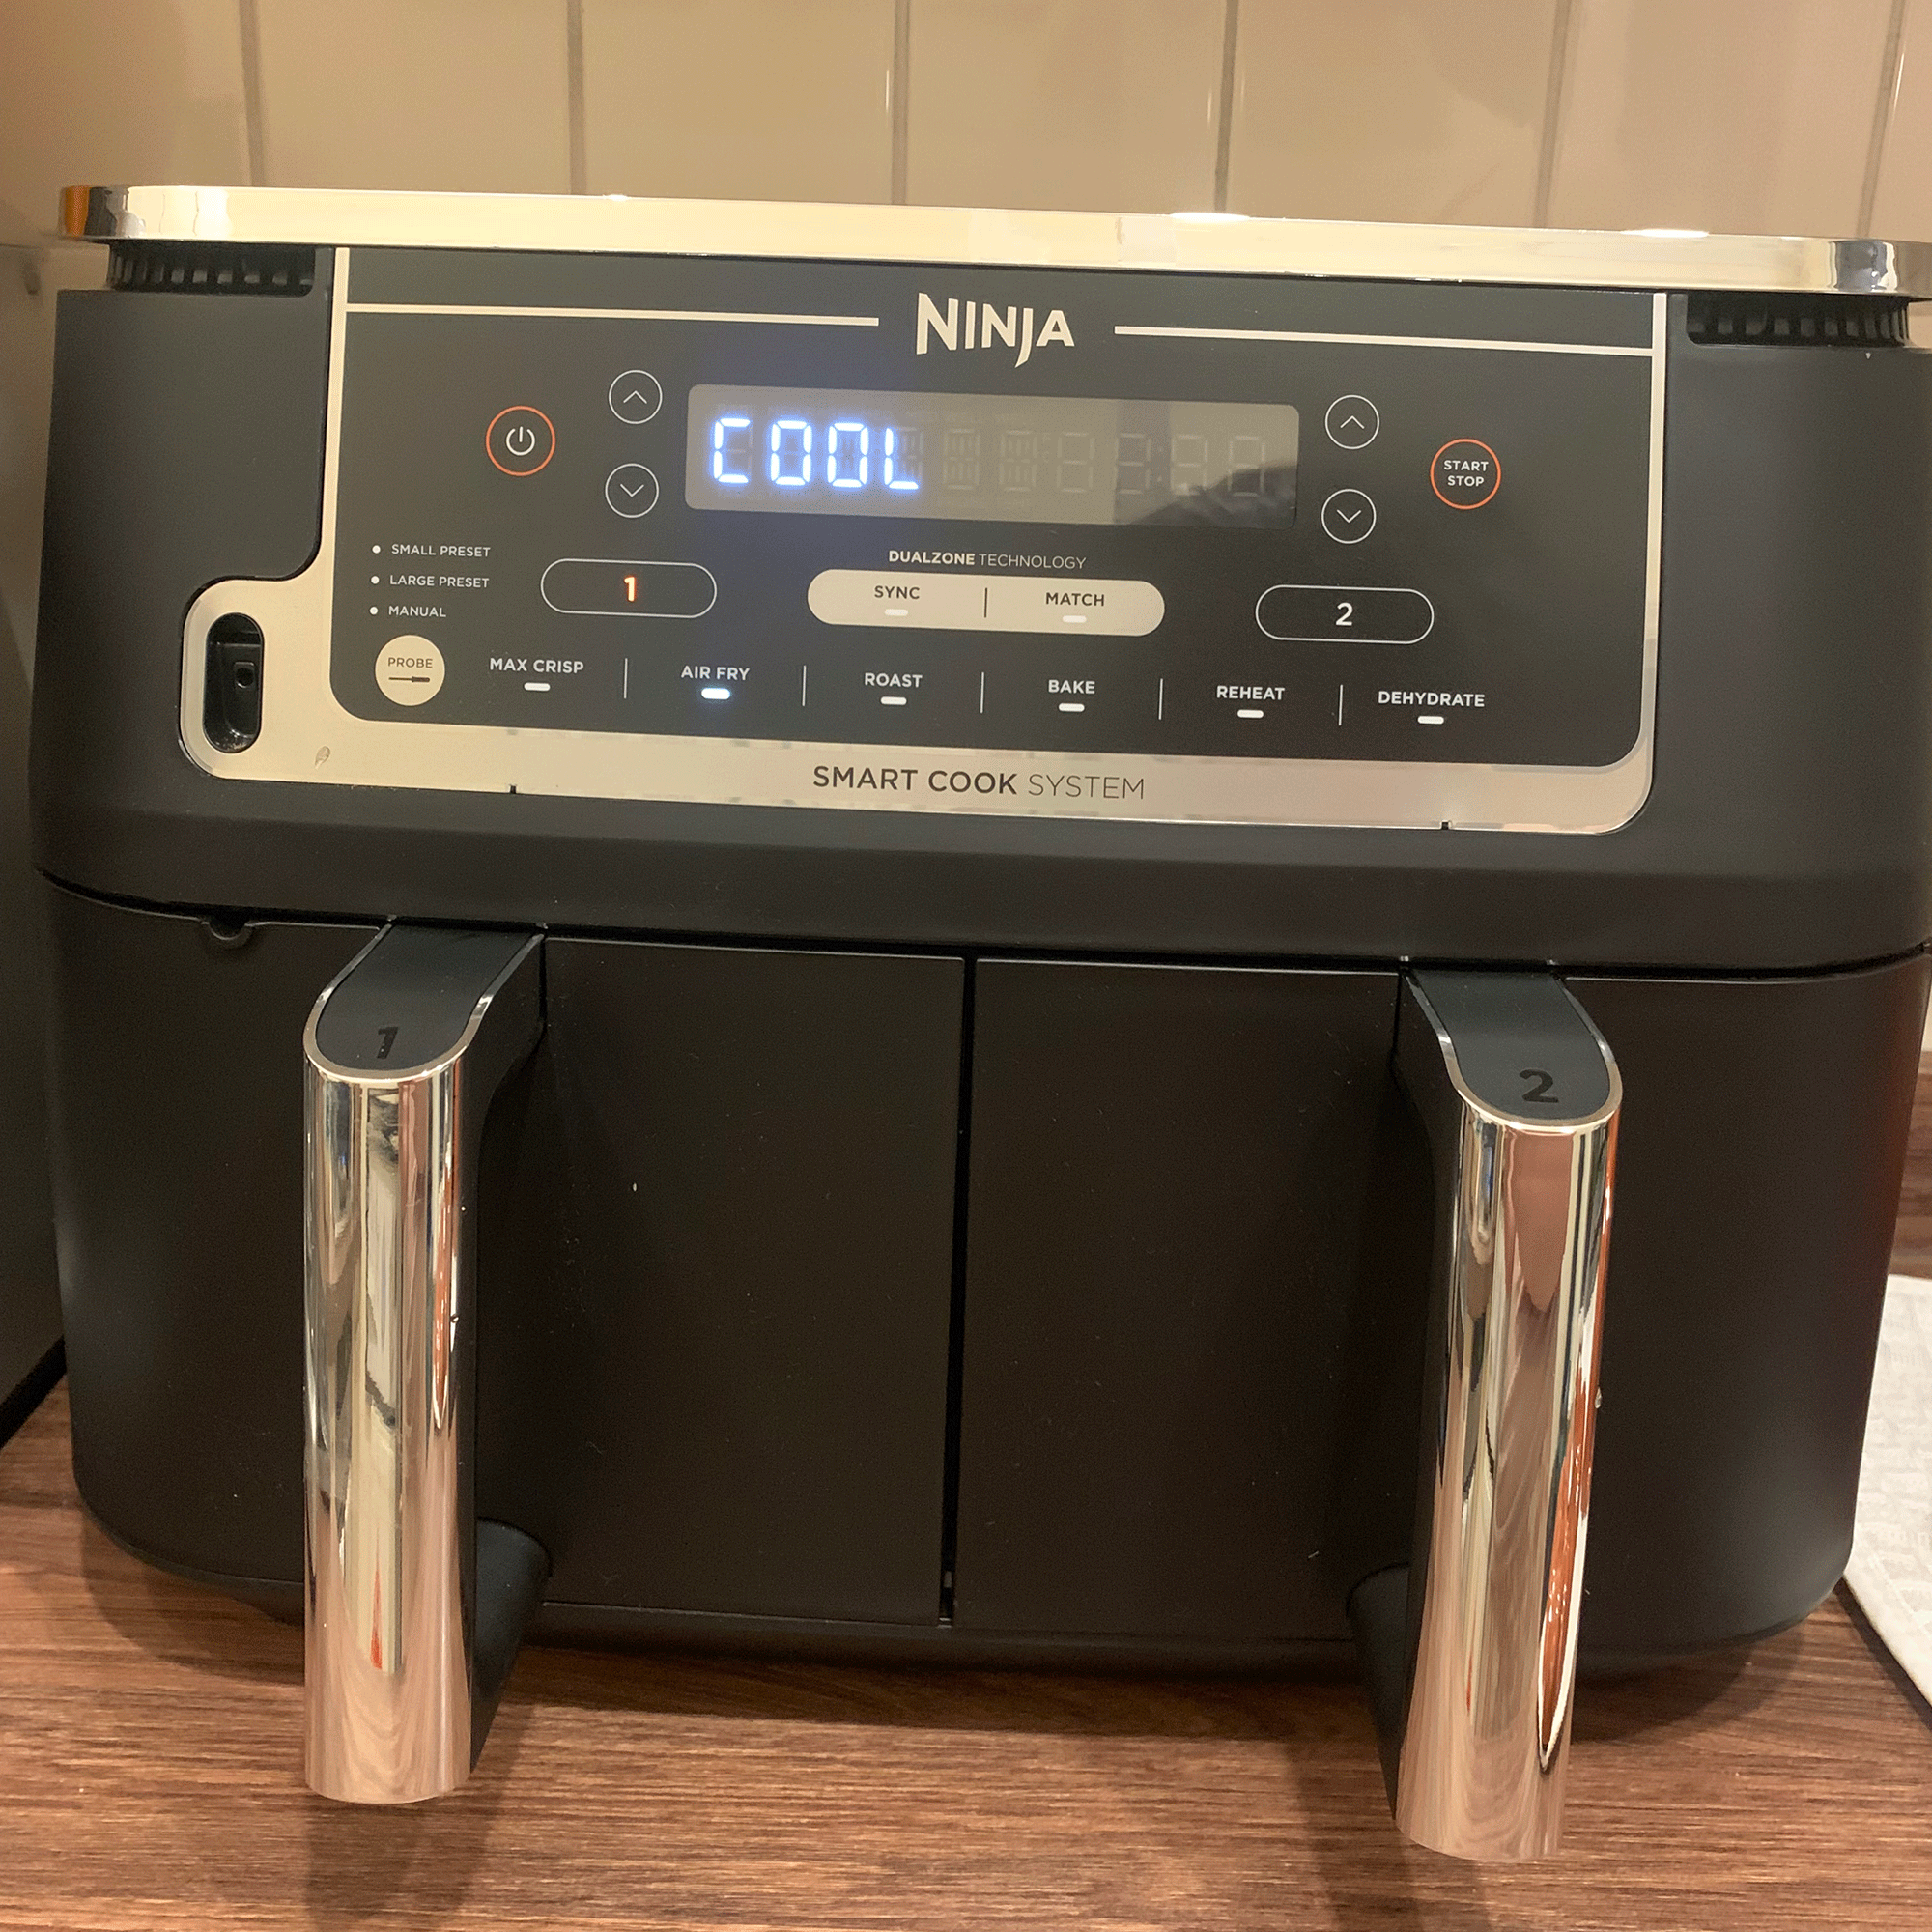 Ninja Dual Zone air fryer with crumble